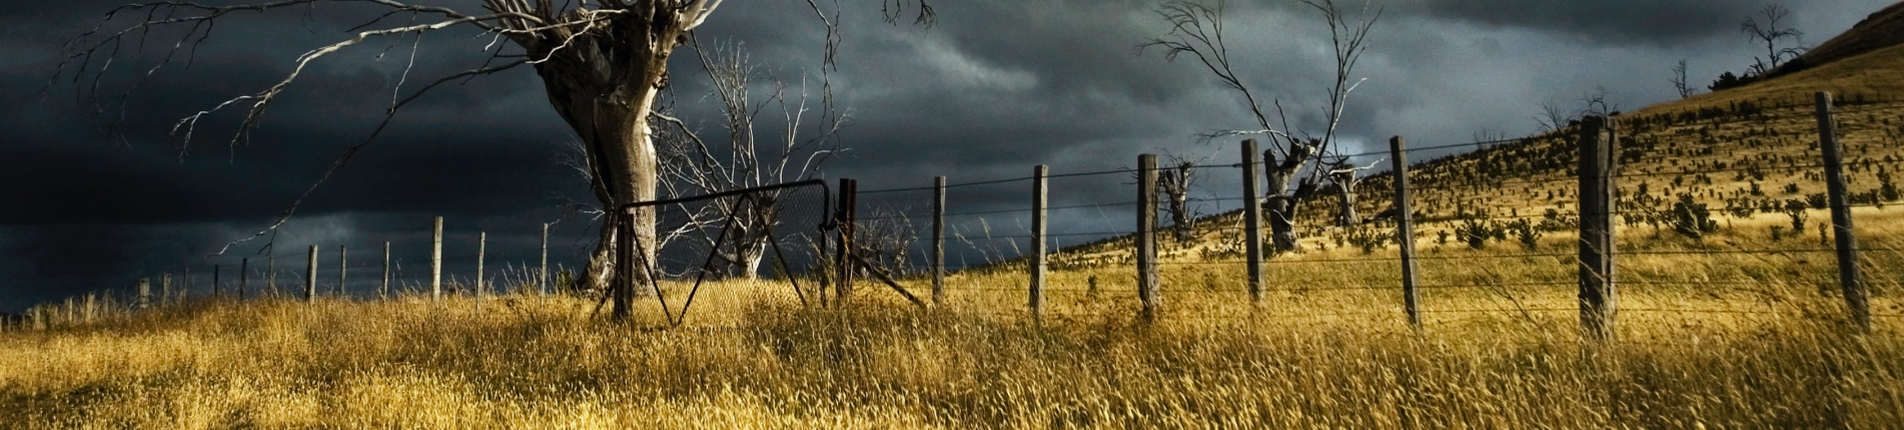 R3’s member survey on personal insolvency and COVID-19: Storm on the horizon